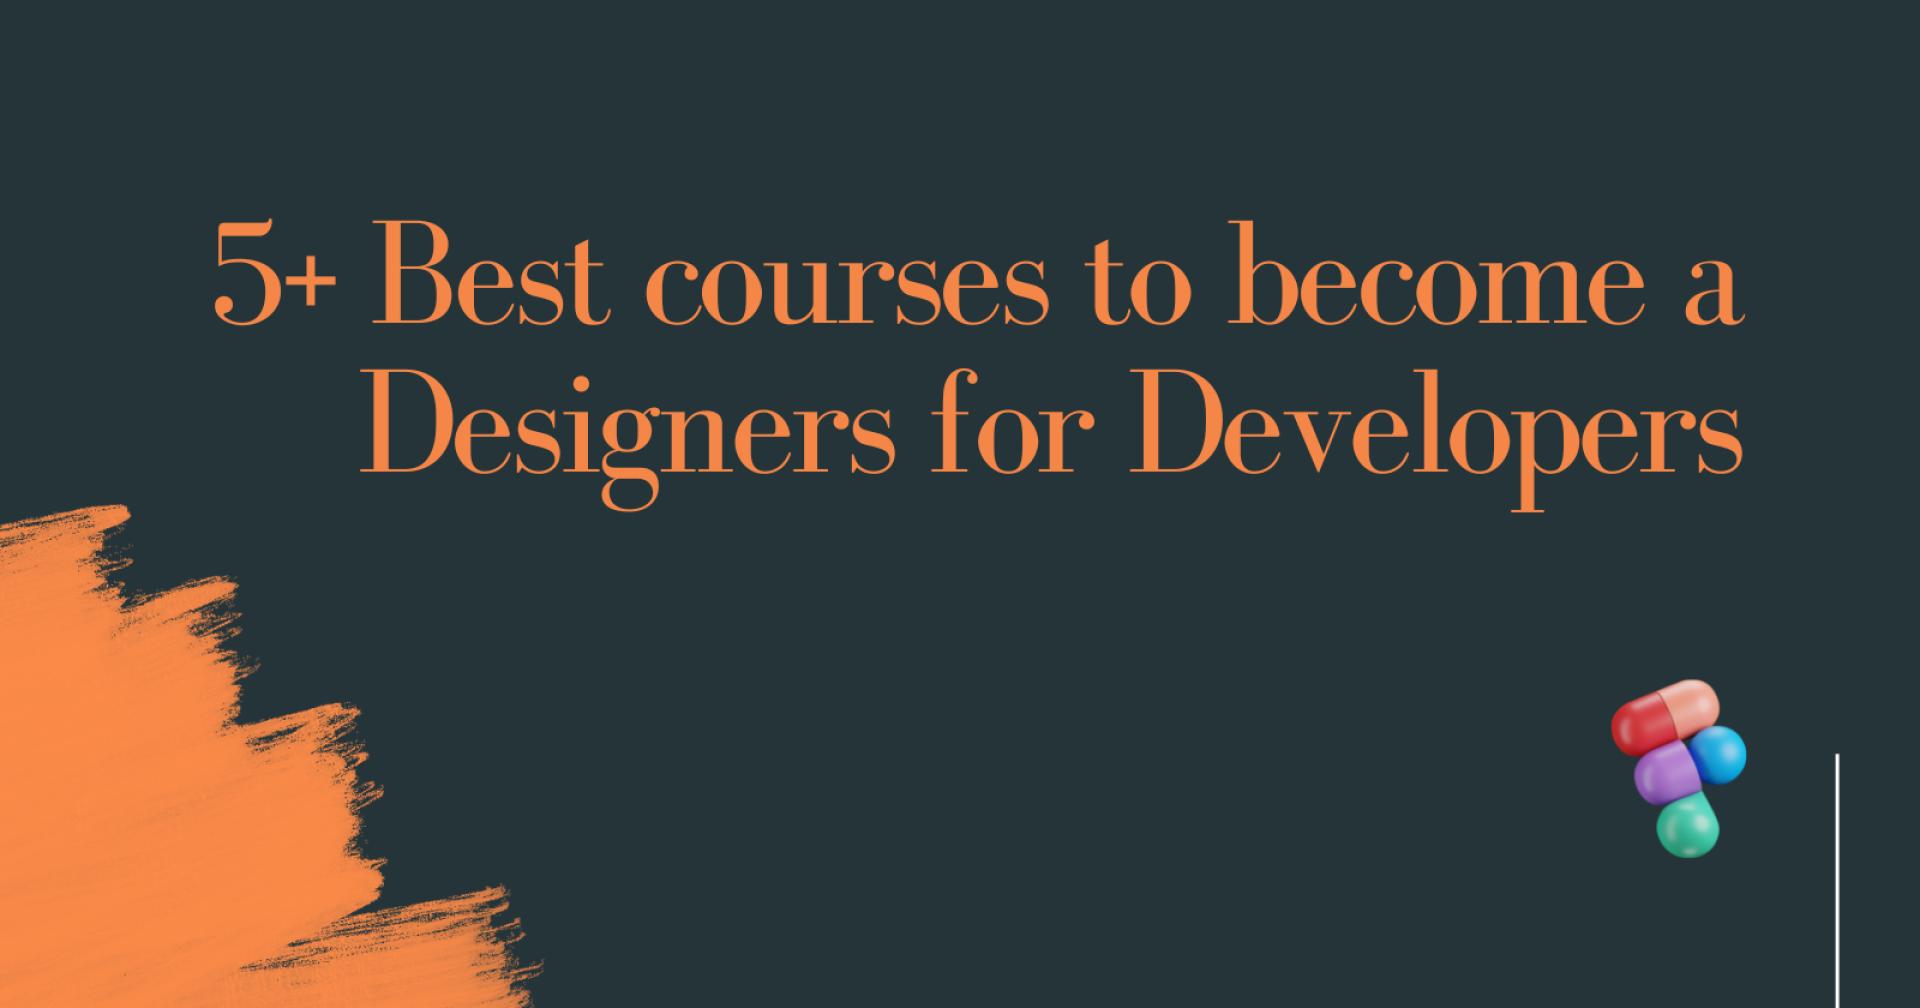 5+ Free Best courses to become a Designer for Developers